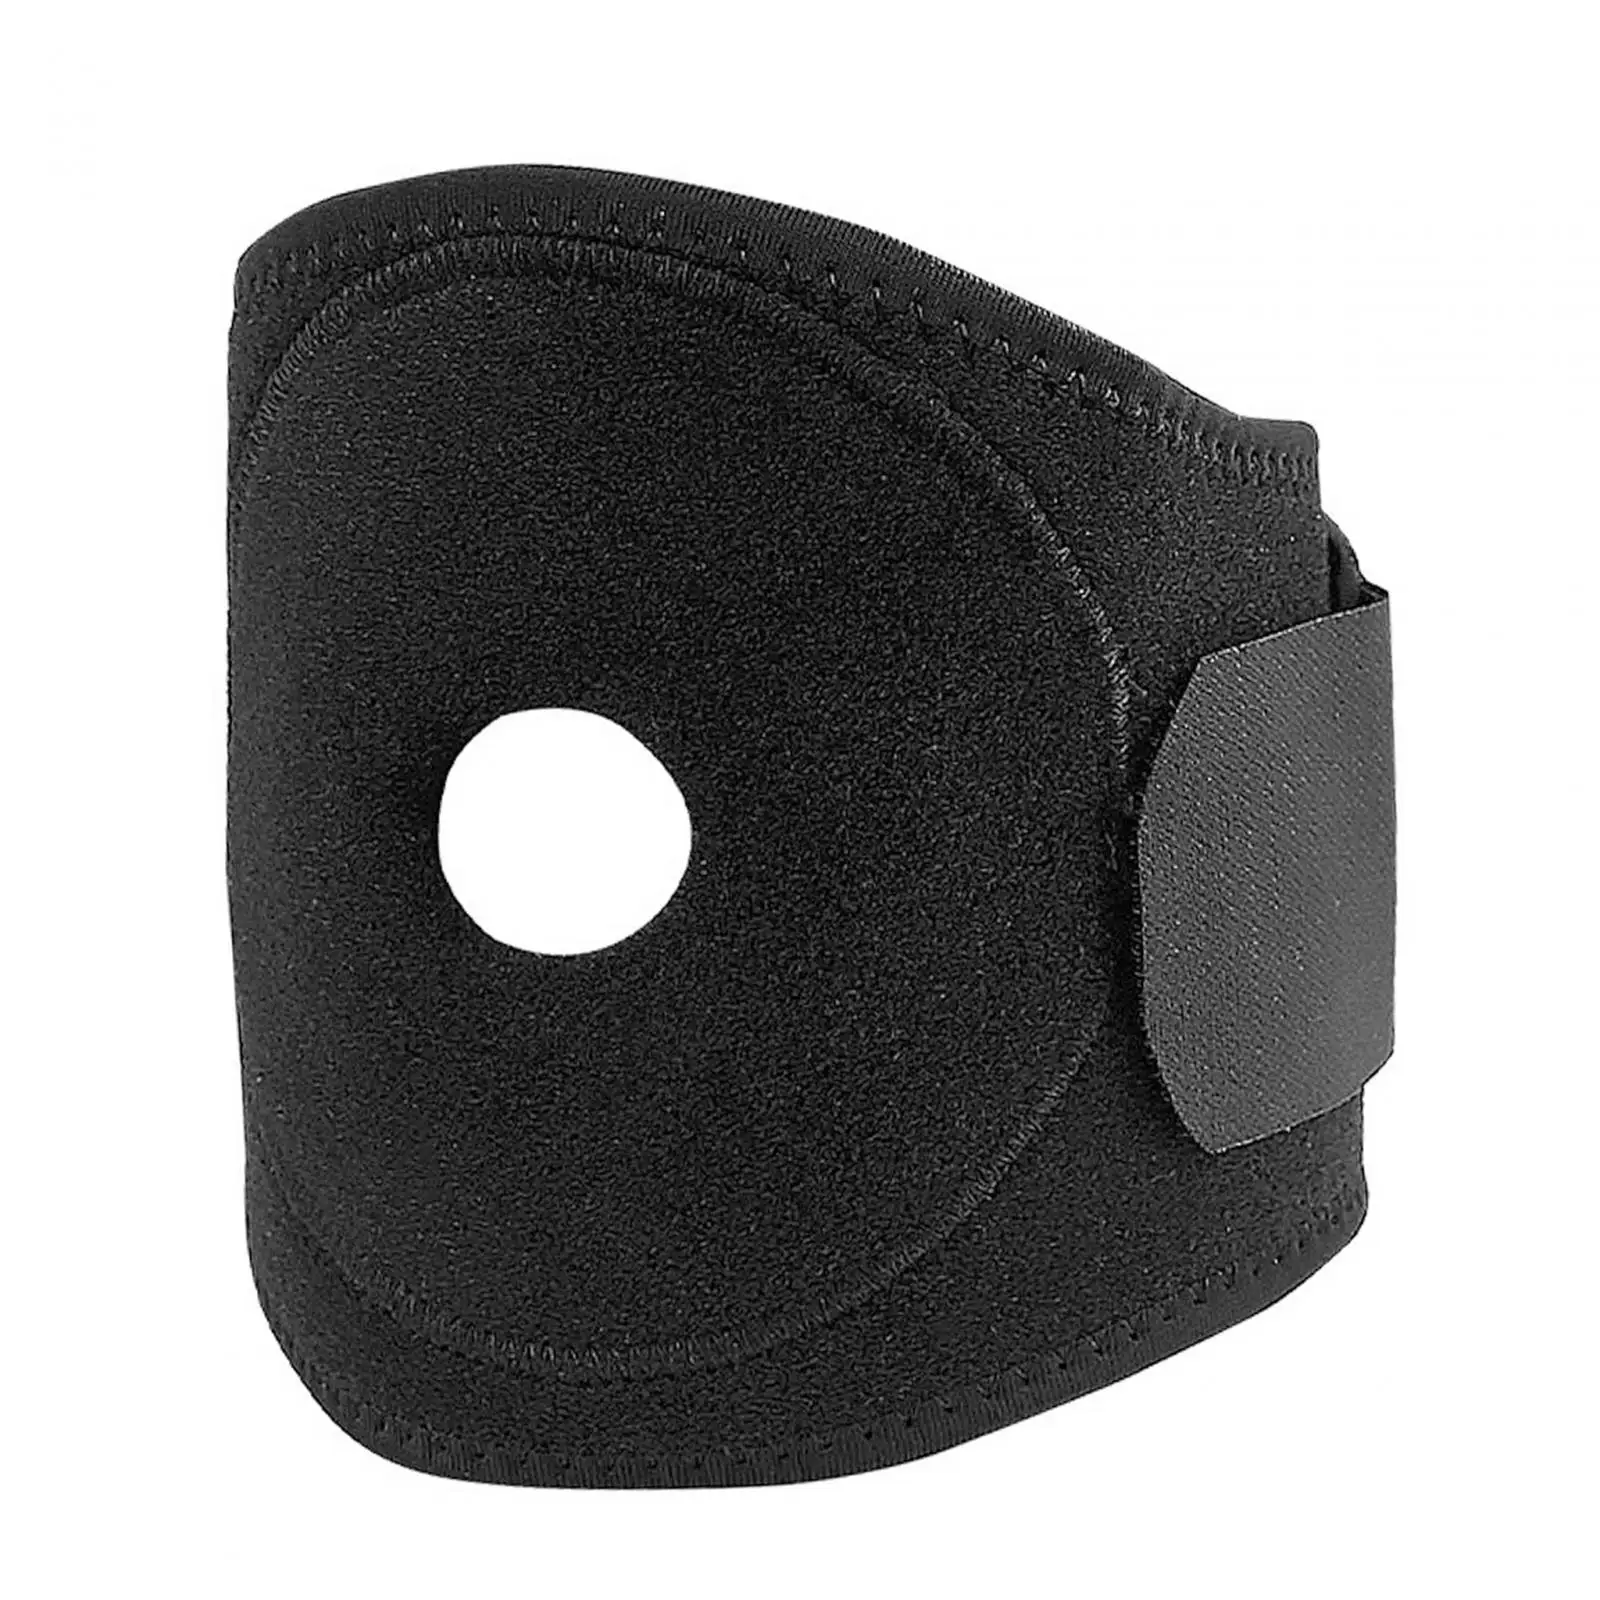 Knee Patellar Pad with Removable Aluminum Plate Thickening Knee Support Sleeve for Running Volleyball Cycling Workout Football